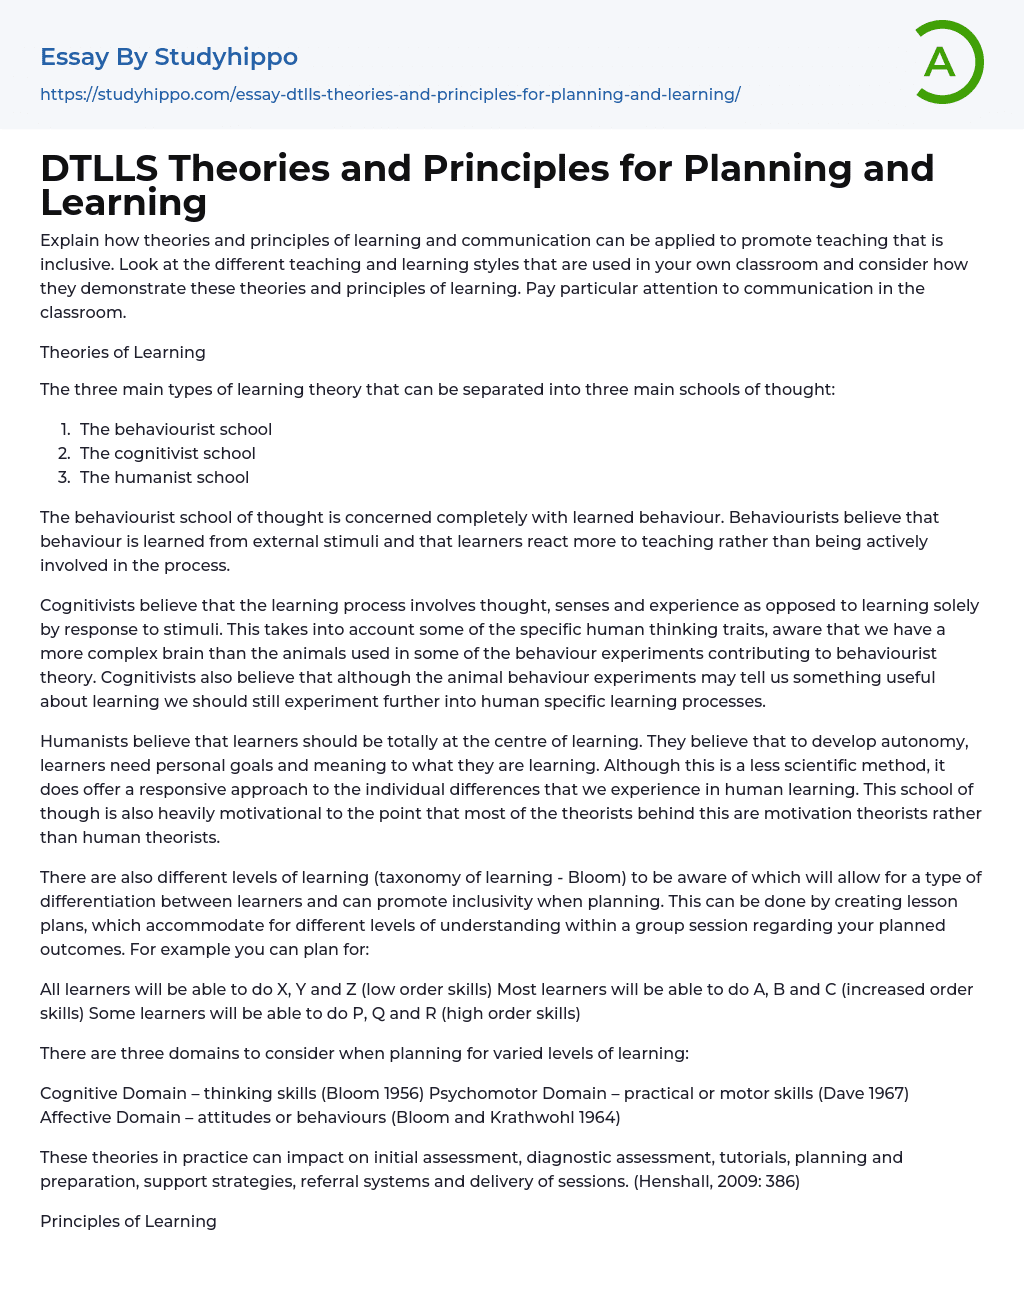 DTLLS Theories and Principles for Planning and Learning Essay Example